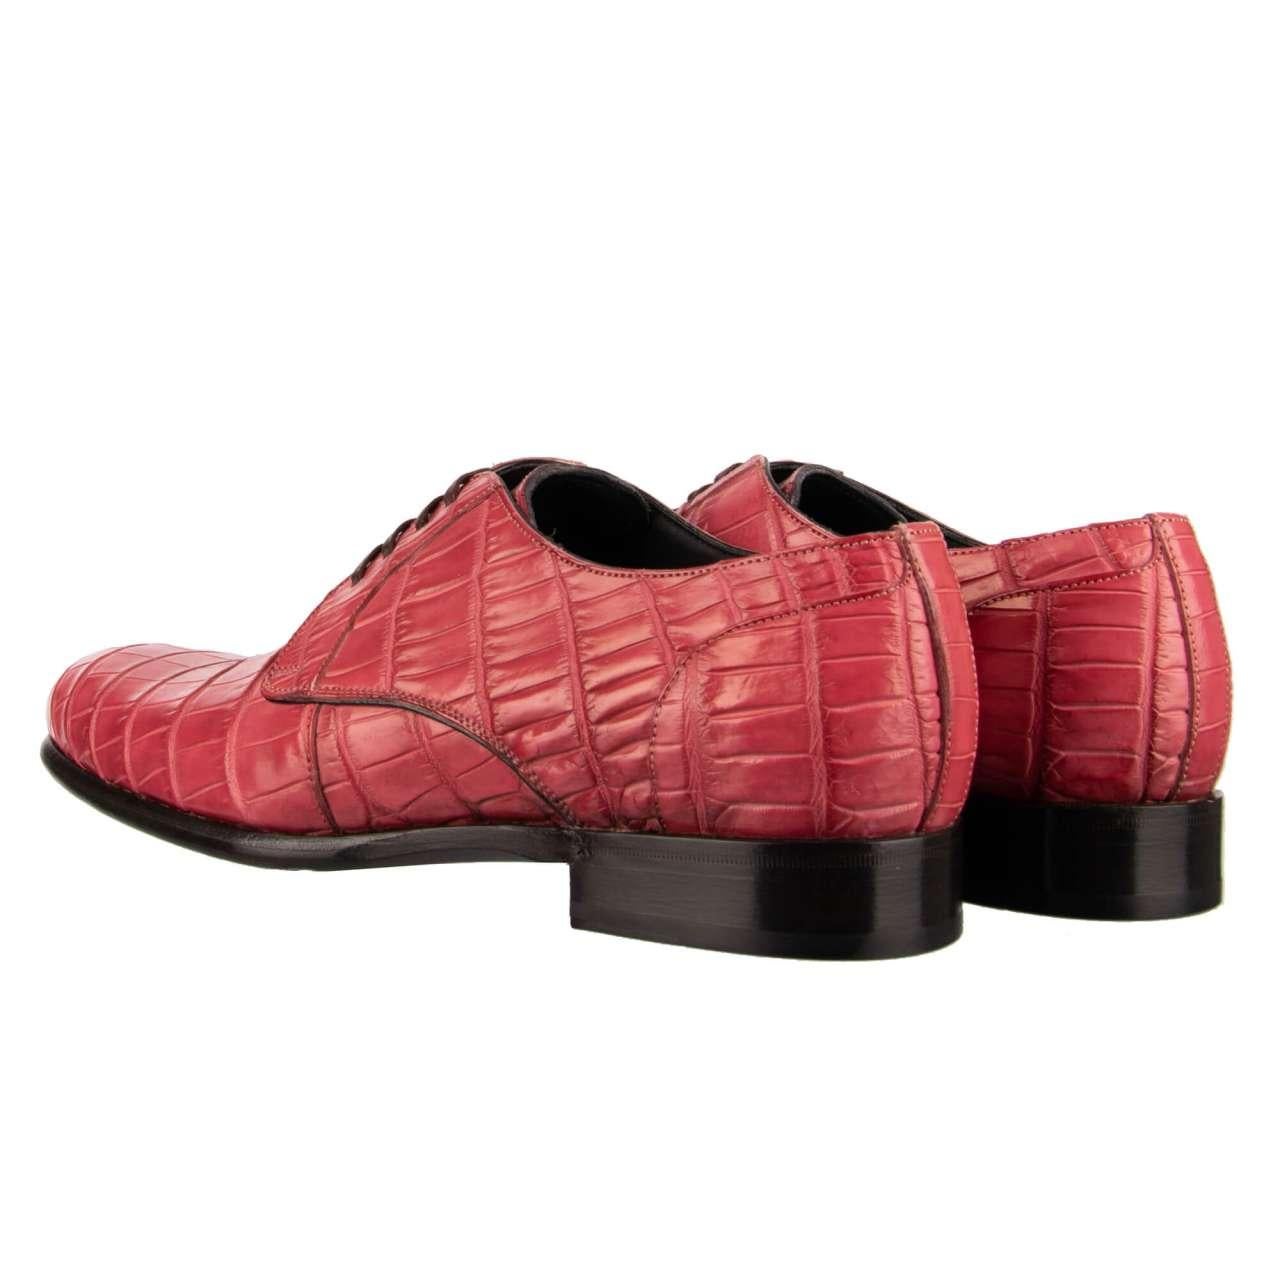 - Very exclusive and rare, formal crocodile leather derby shoes SIENA in pink by DOLCE & GABBANA - MADE IN ITALY - Former RRP: EUR 4.950 - New with Box - Model: A10037-A2D14-80404 - Material: 100% Crocodile Leather (Coccodrillo) - Sole: Leather -